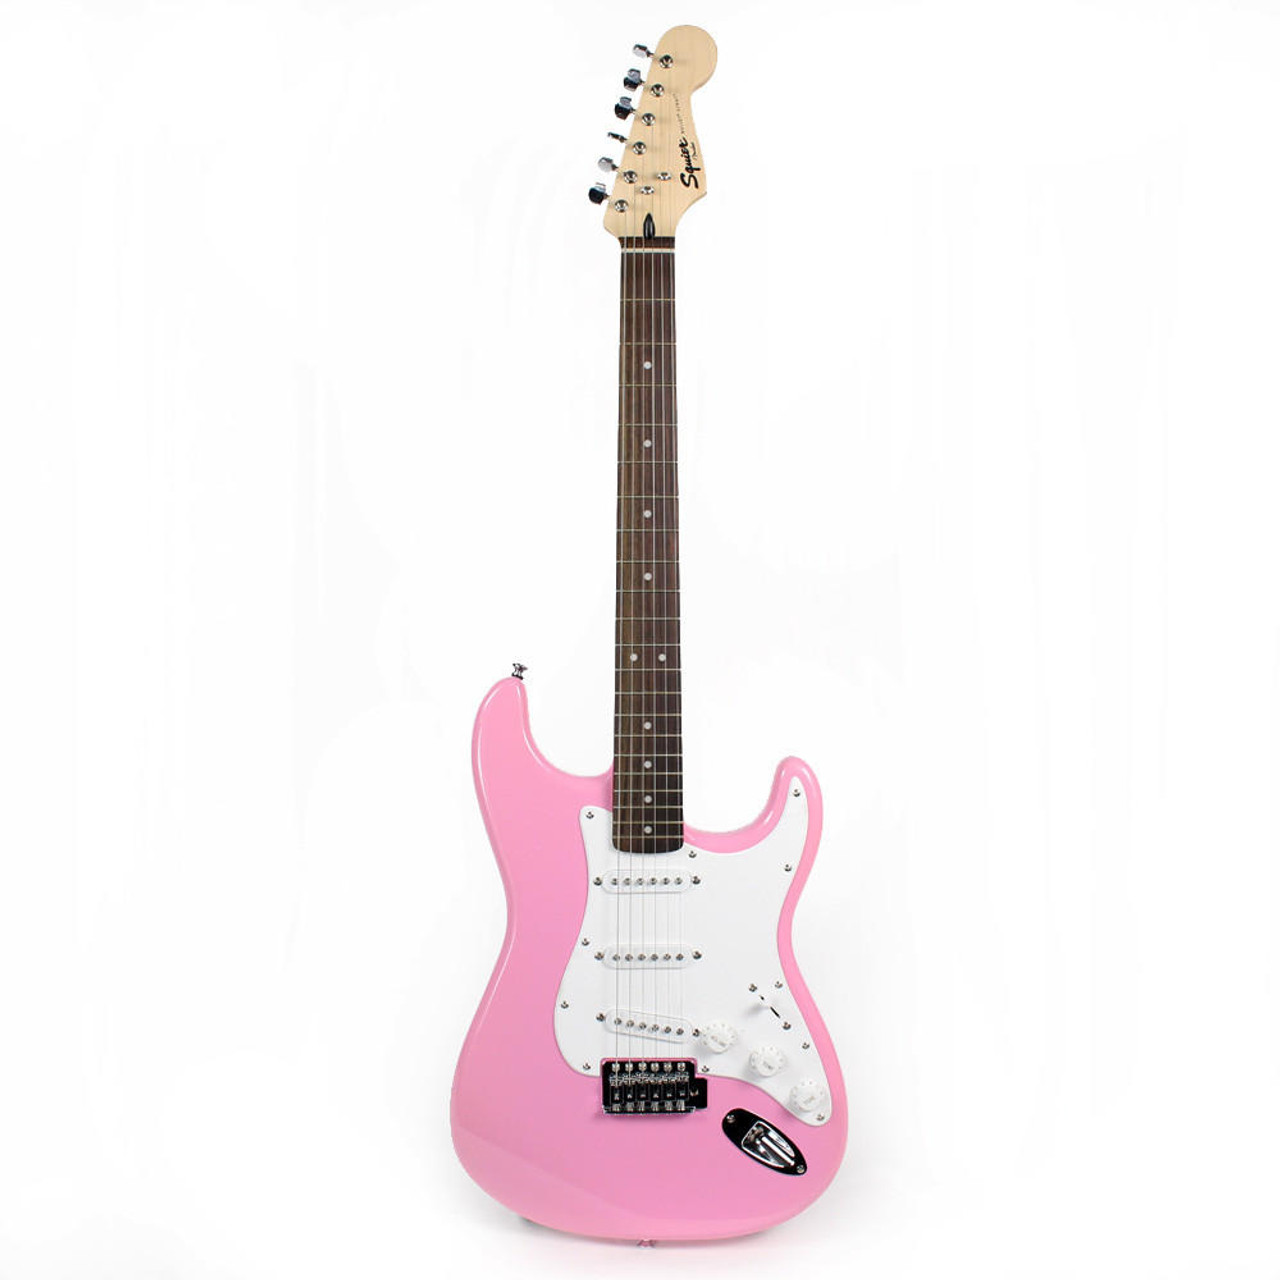 Squier Bullet Stratocaster Electric Guitar in Pink Finish